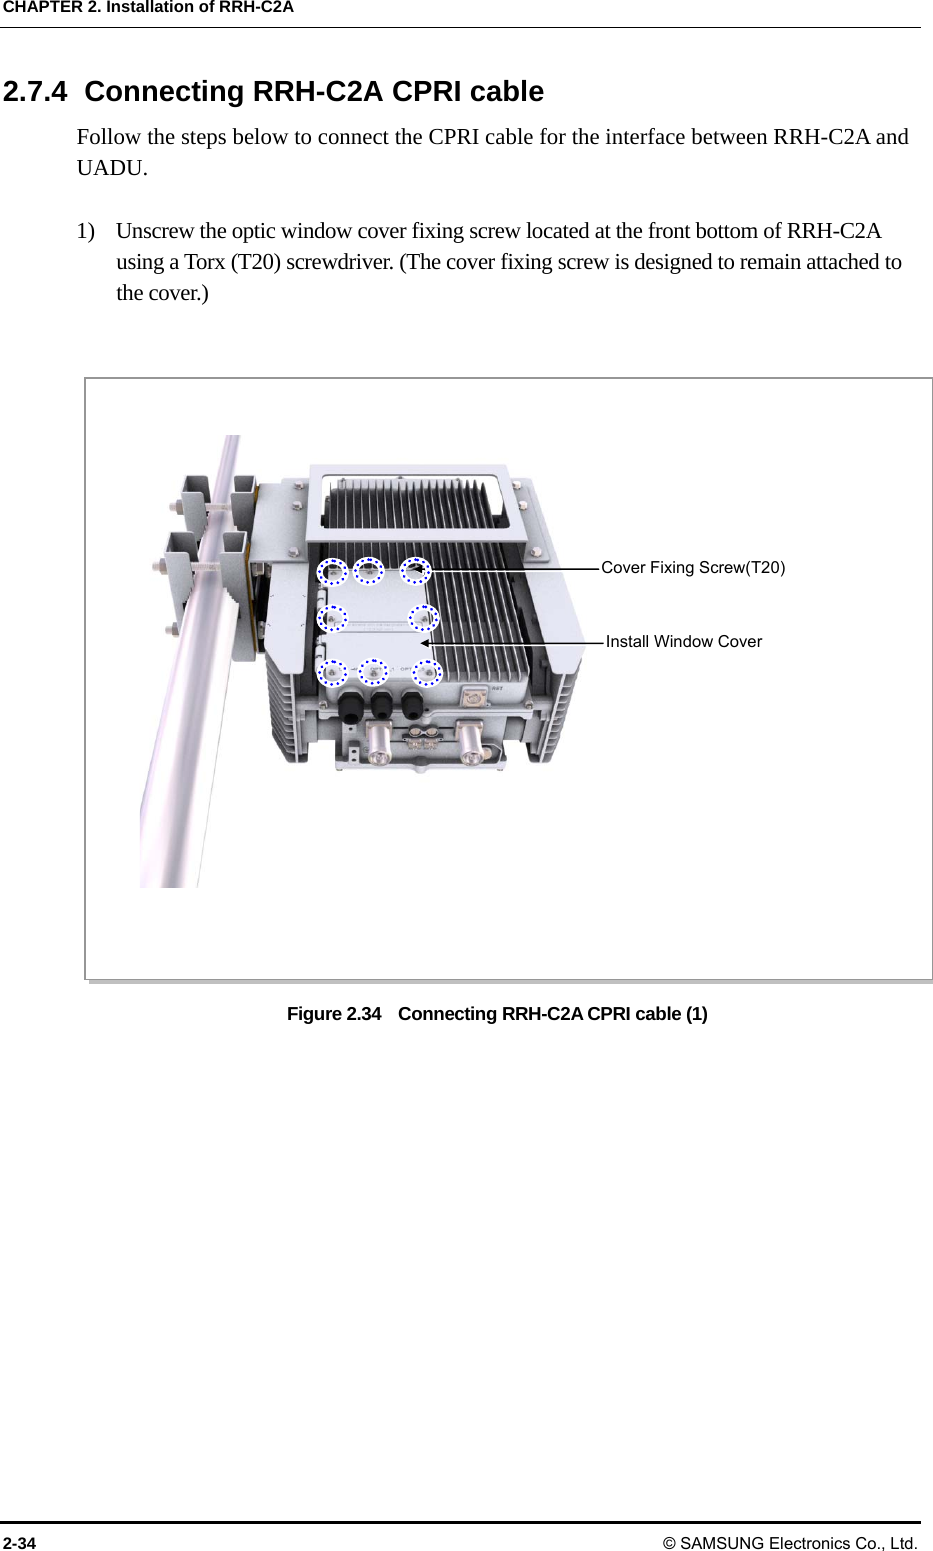 CHAPTER 2. Installation of RRH-C2A 2-34 © SAMSUNG Electronics Co., Ltd. 2.7.4  Connecting RRH-C2A CPRI cable Follow the steps below to connect the CPRI cable for the interface between RRH-C2A and UADU.  1)    Unscrew the optic window cover fixing screw located at the front bottom of RRH-C2A using a Torx (T20) screwdriver. (The cover fixing screw is designed to remain attached to the cover.)  Figure 2.34    Connecting RRH-C2A CPRI cable (1)  Cover Fixing Screw(T20) Install Window Cover 